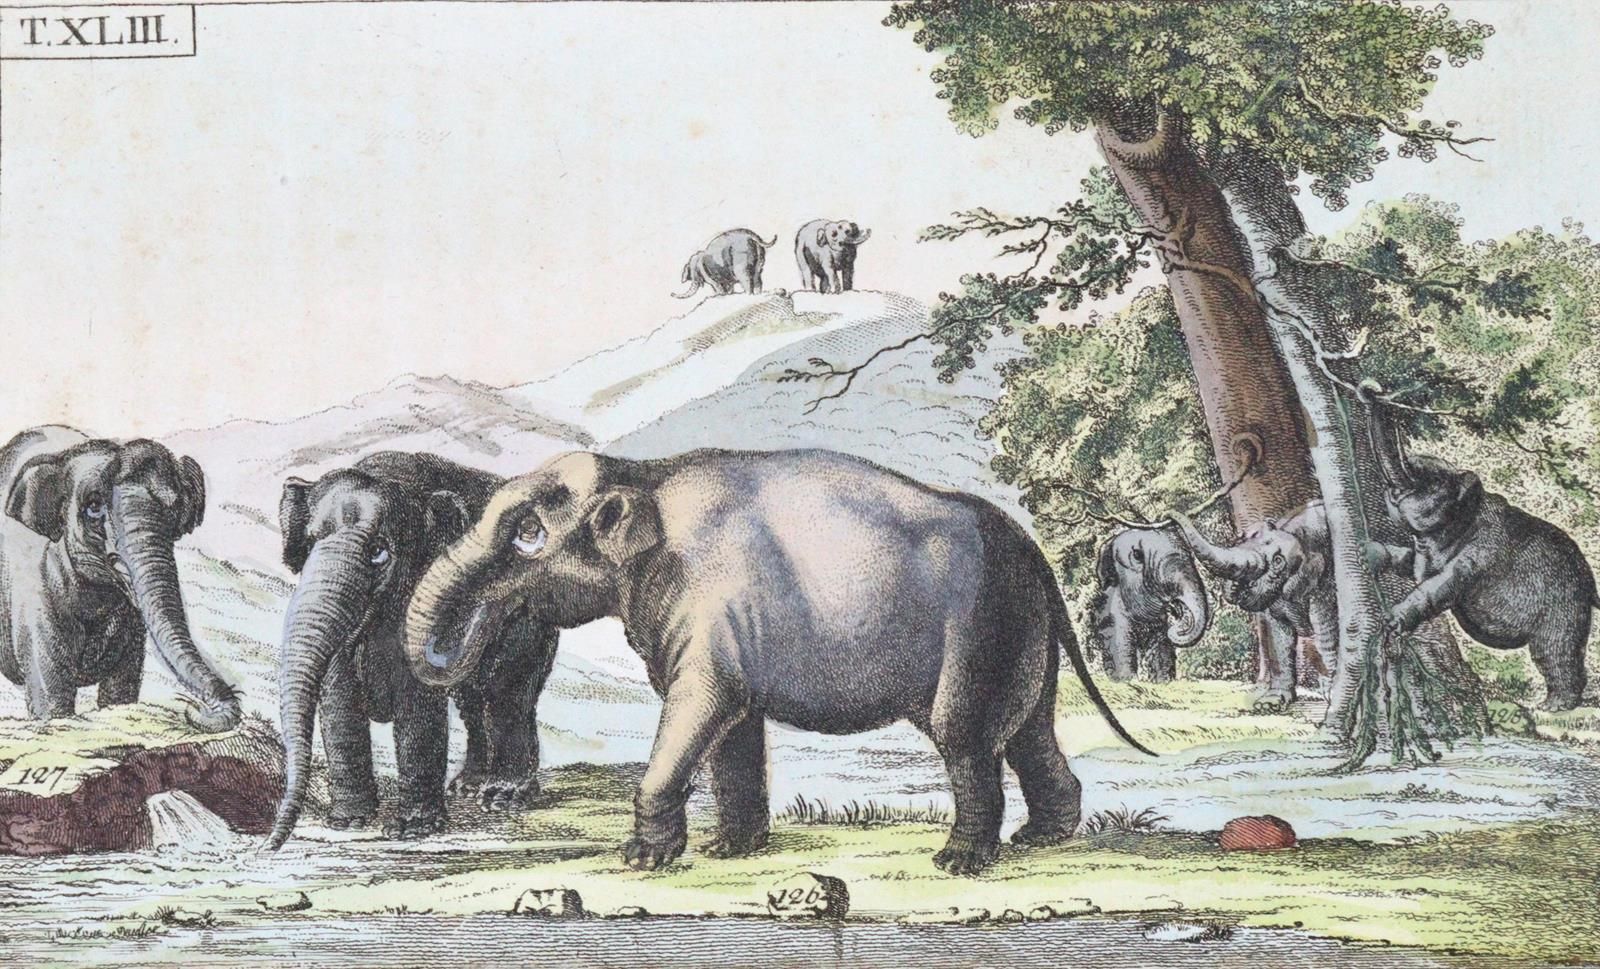 (Wilhelm,G.T.). The first part of the book is a book on the history of mammals. &hellip;